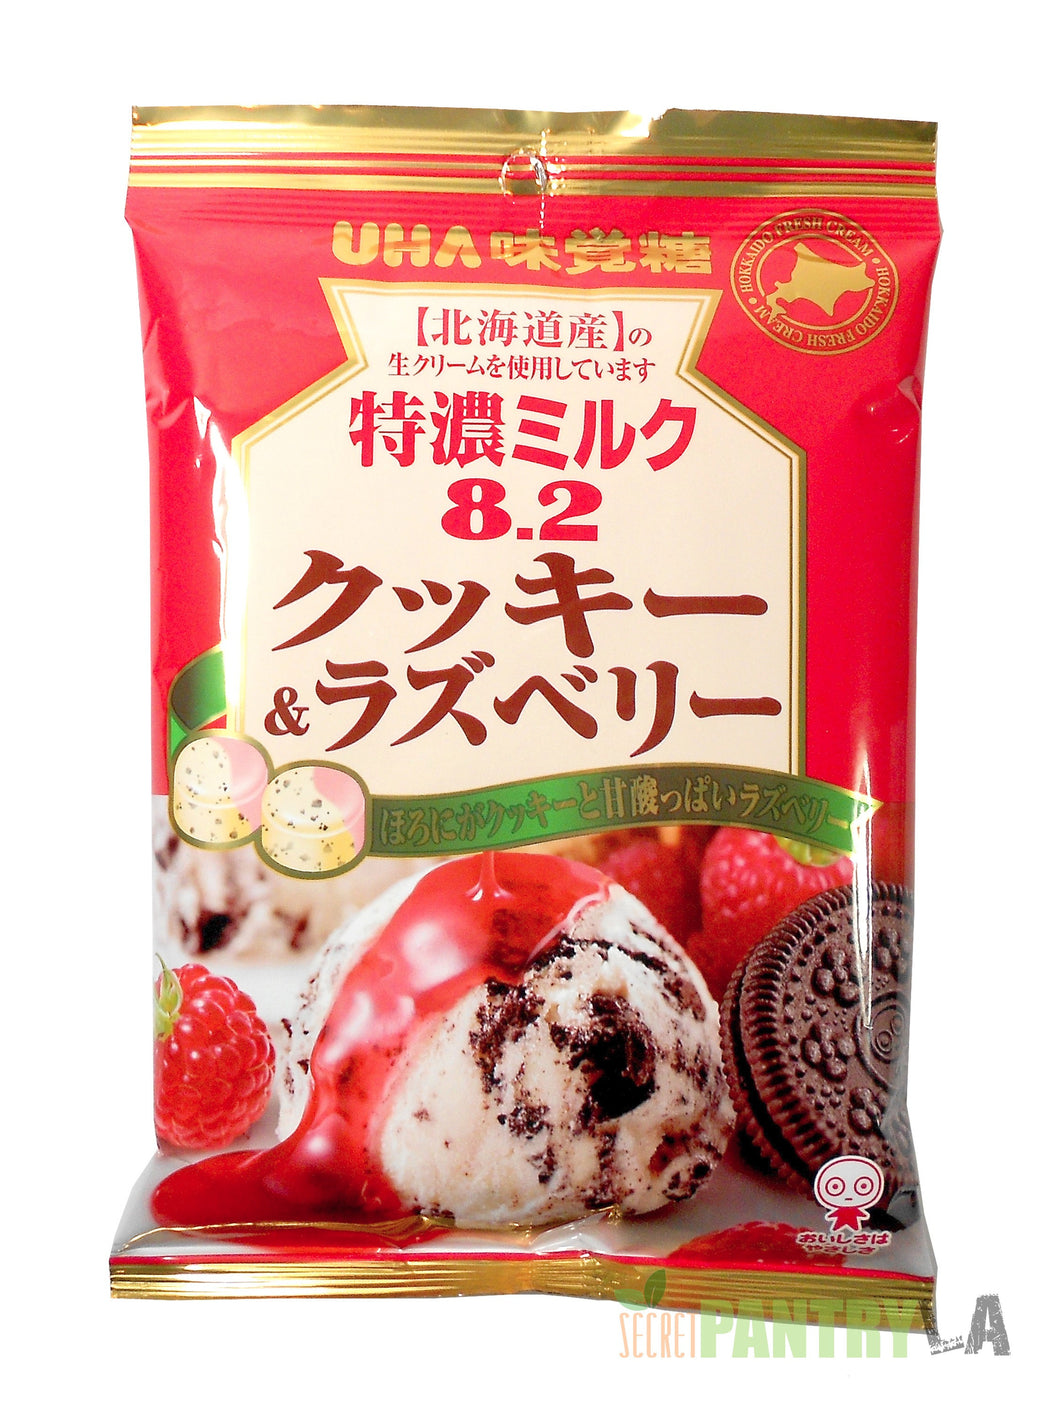 UHA 8.2 High Concentrated Tokuno Milk Cookies & Raspberry Candy 2.85 OZ.